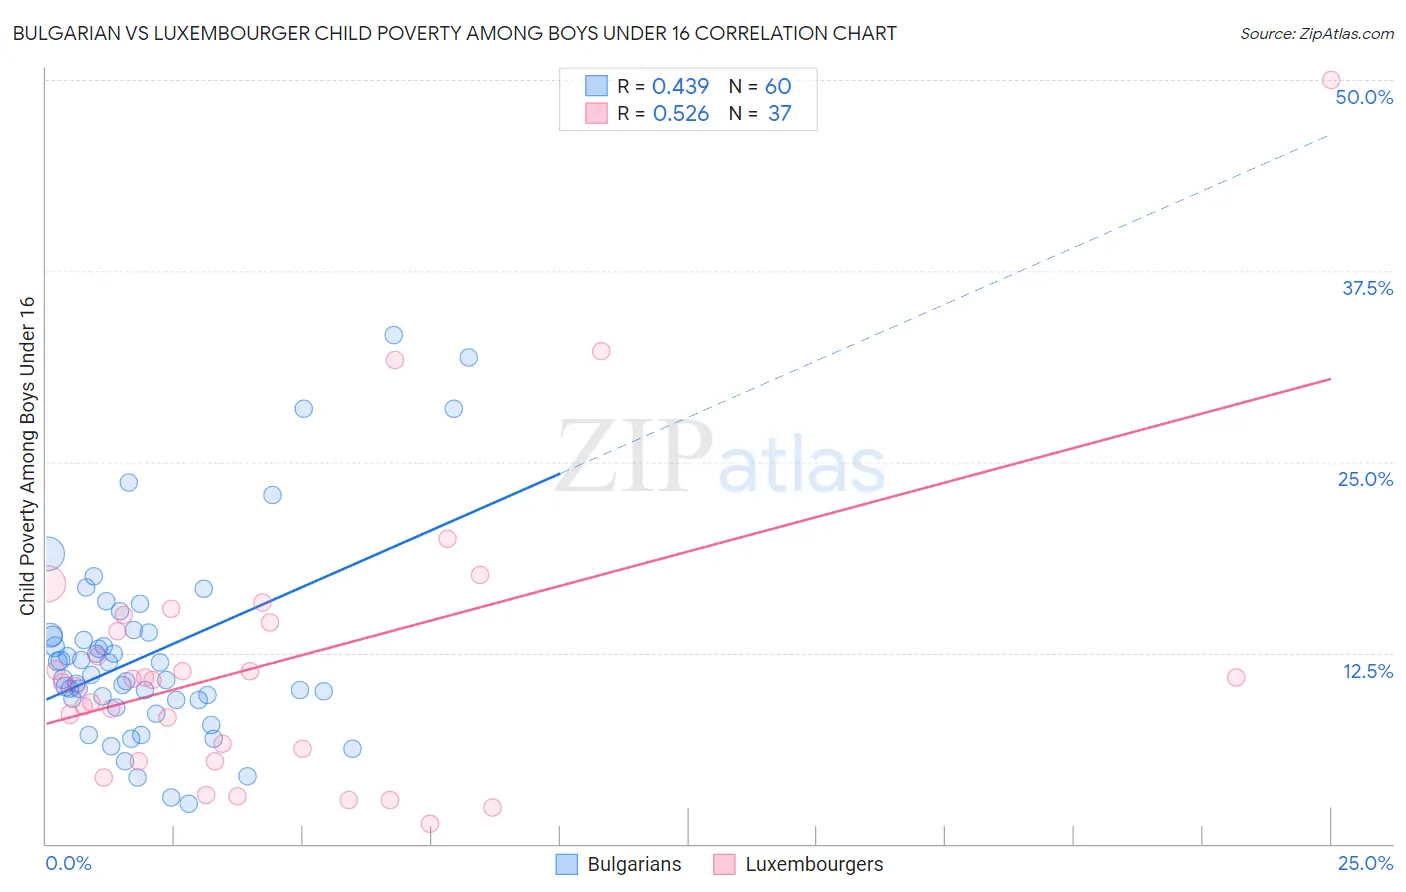 Bulgarian vs Luxembourger Child Poverty Among Boys Under 16